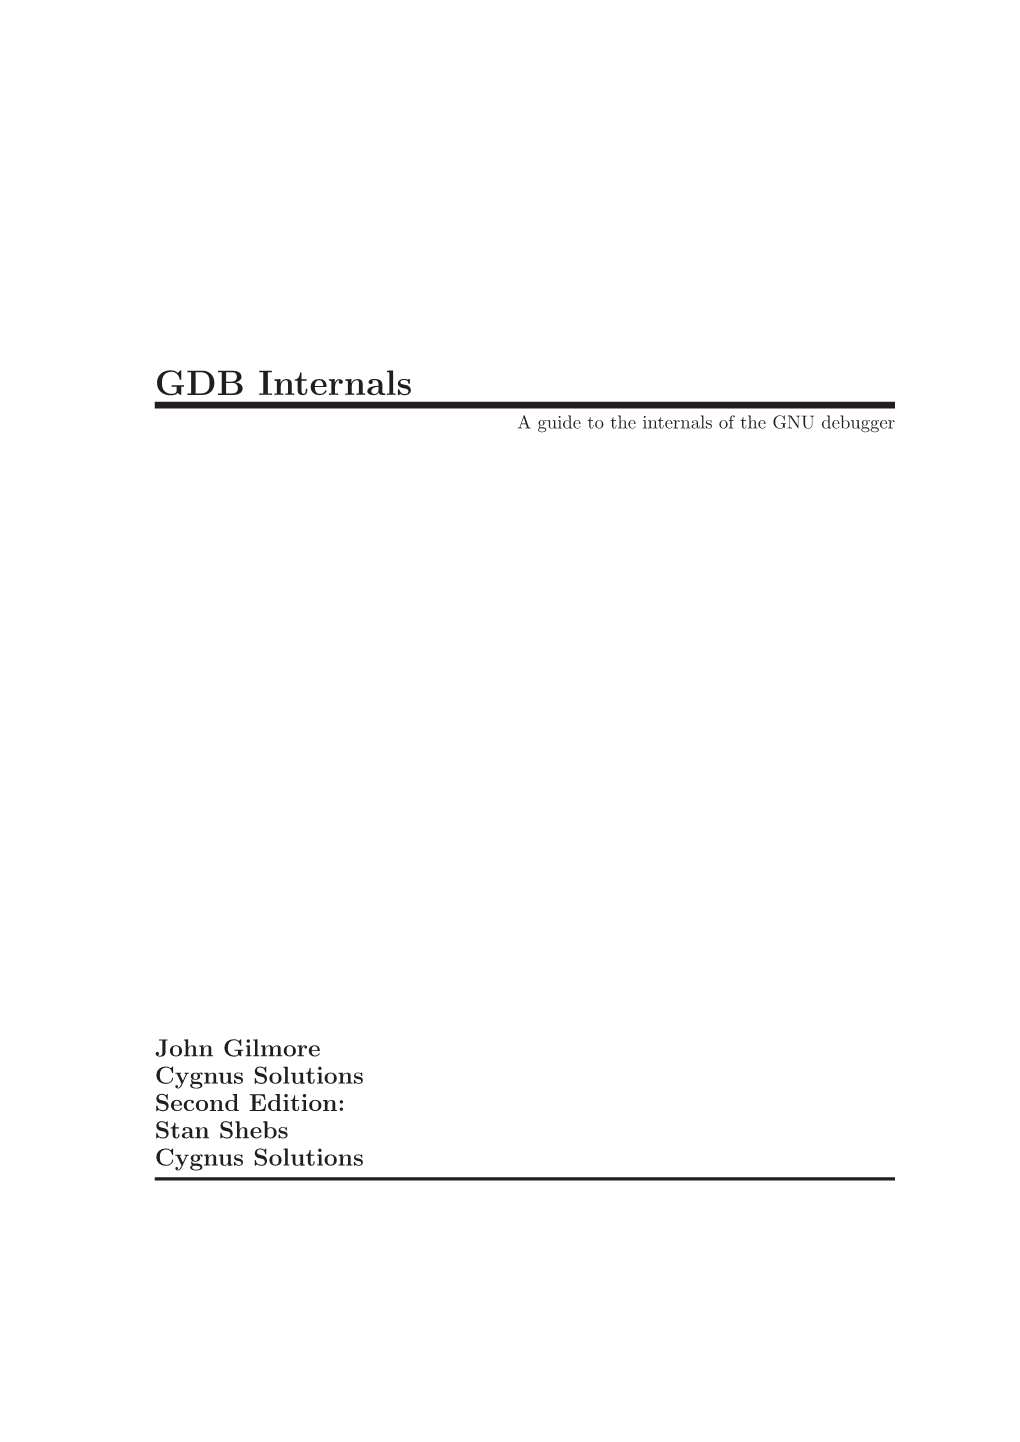 GDB Internals a Guide to the Internals of the GNU Debugger